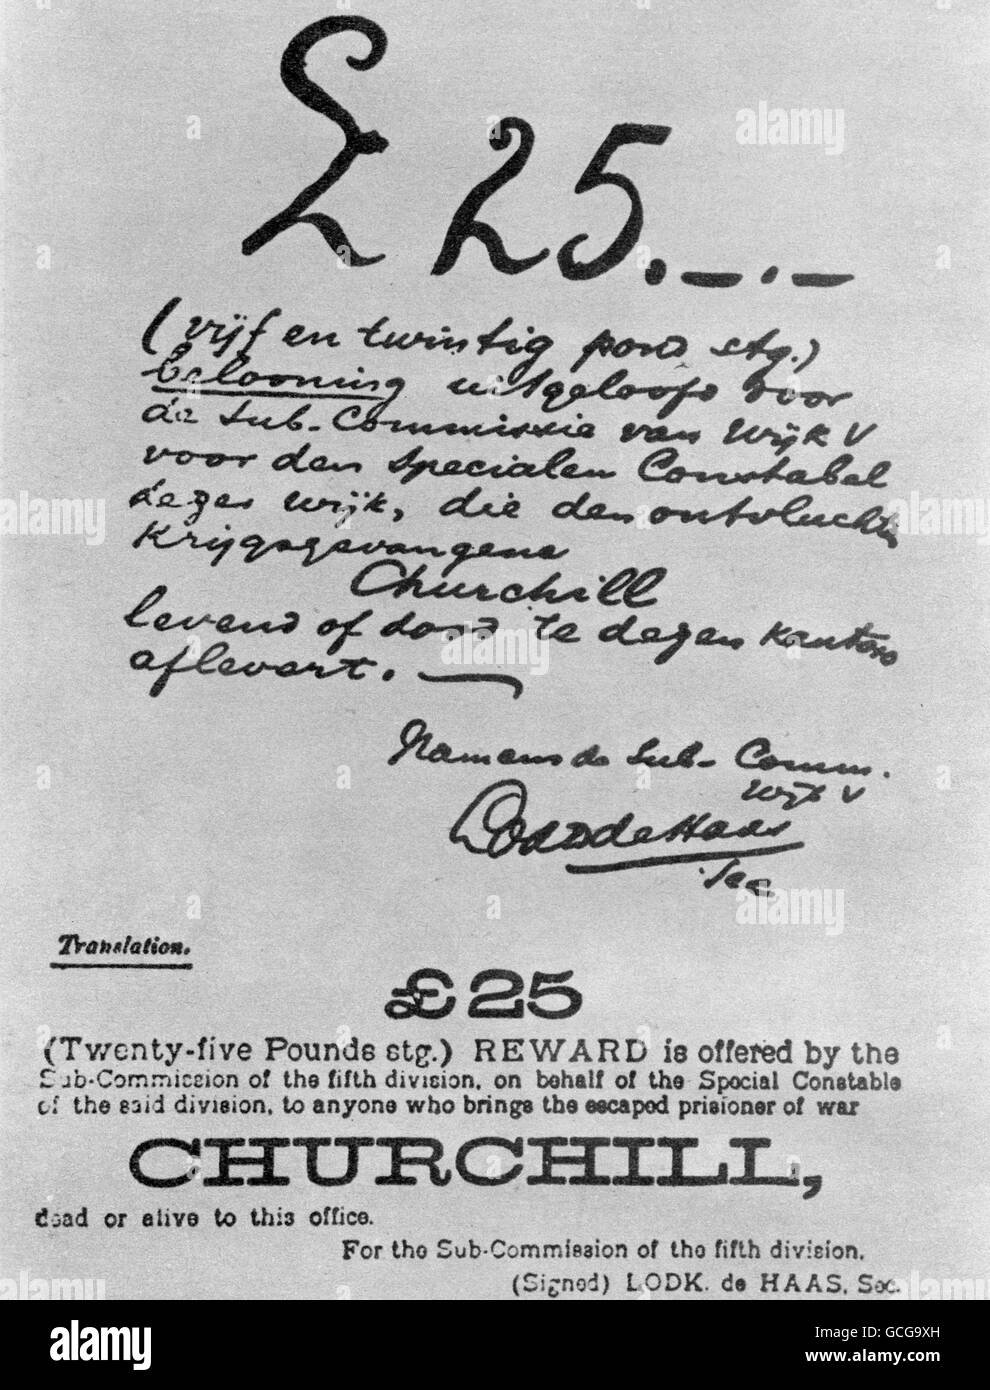 A wanted notice put out for Winston Churchill after he escaped from a prisoner of war camp in South Africa during the Boer War. Twenty five pounds was offered to anyone who brought the escaped prisoner dead or alive to the office. Stock Photo